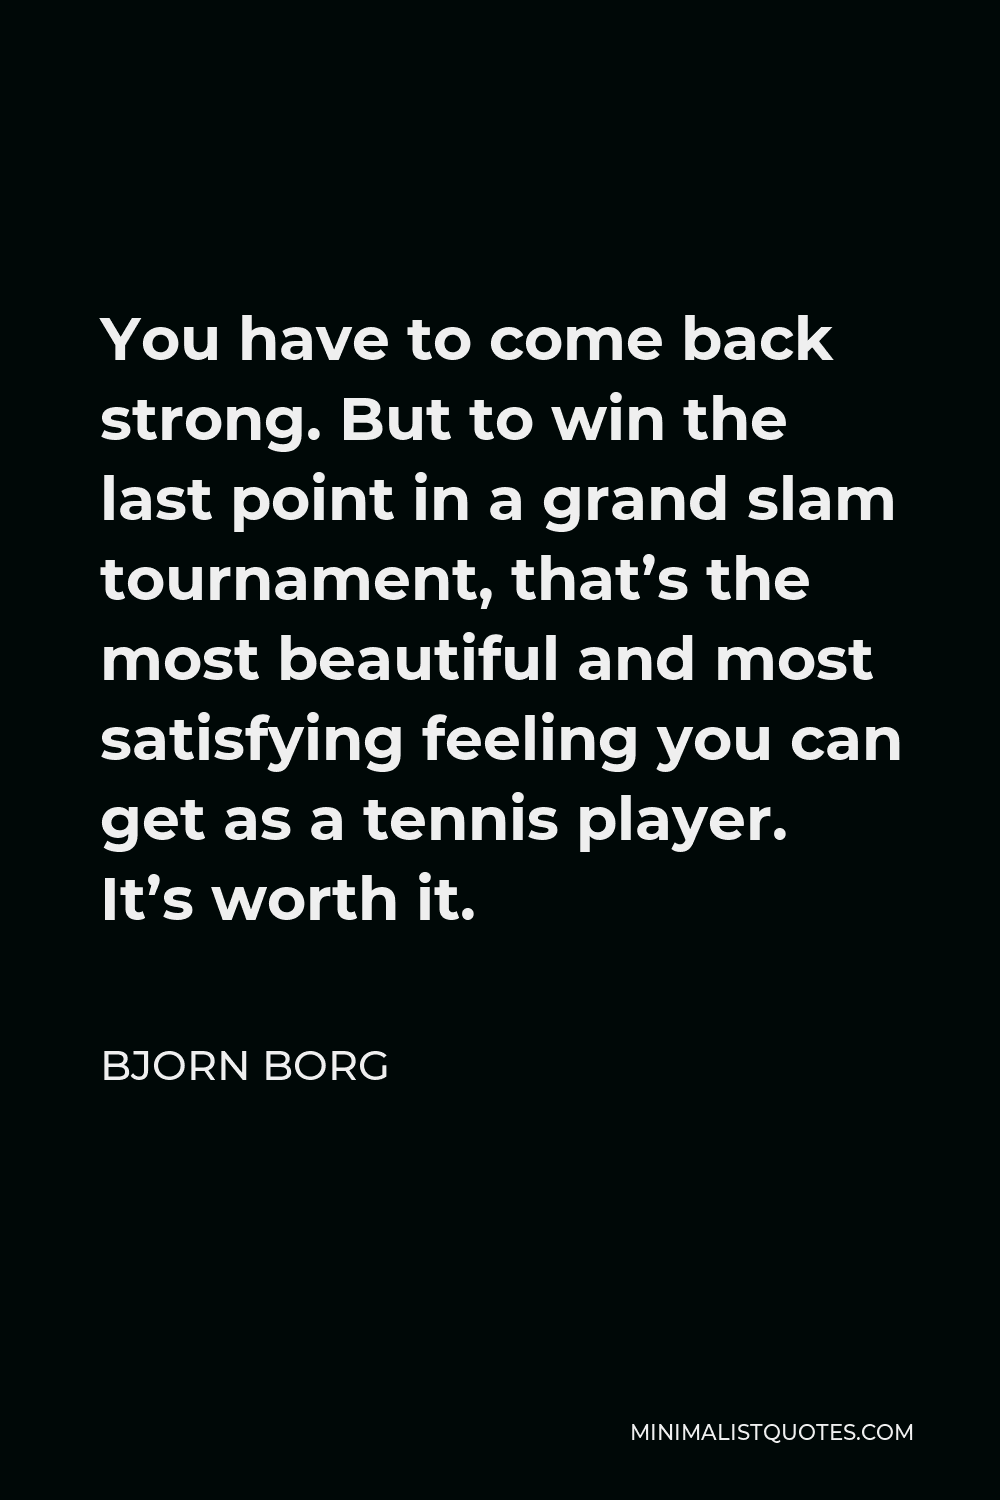 Bjorn Borg Quote - You have to come back strong. But to win the last point in a grand slam tournament, that’s the most beautiful and most satisfying feeling you can get as a tennis player. It’s worth it.